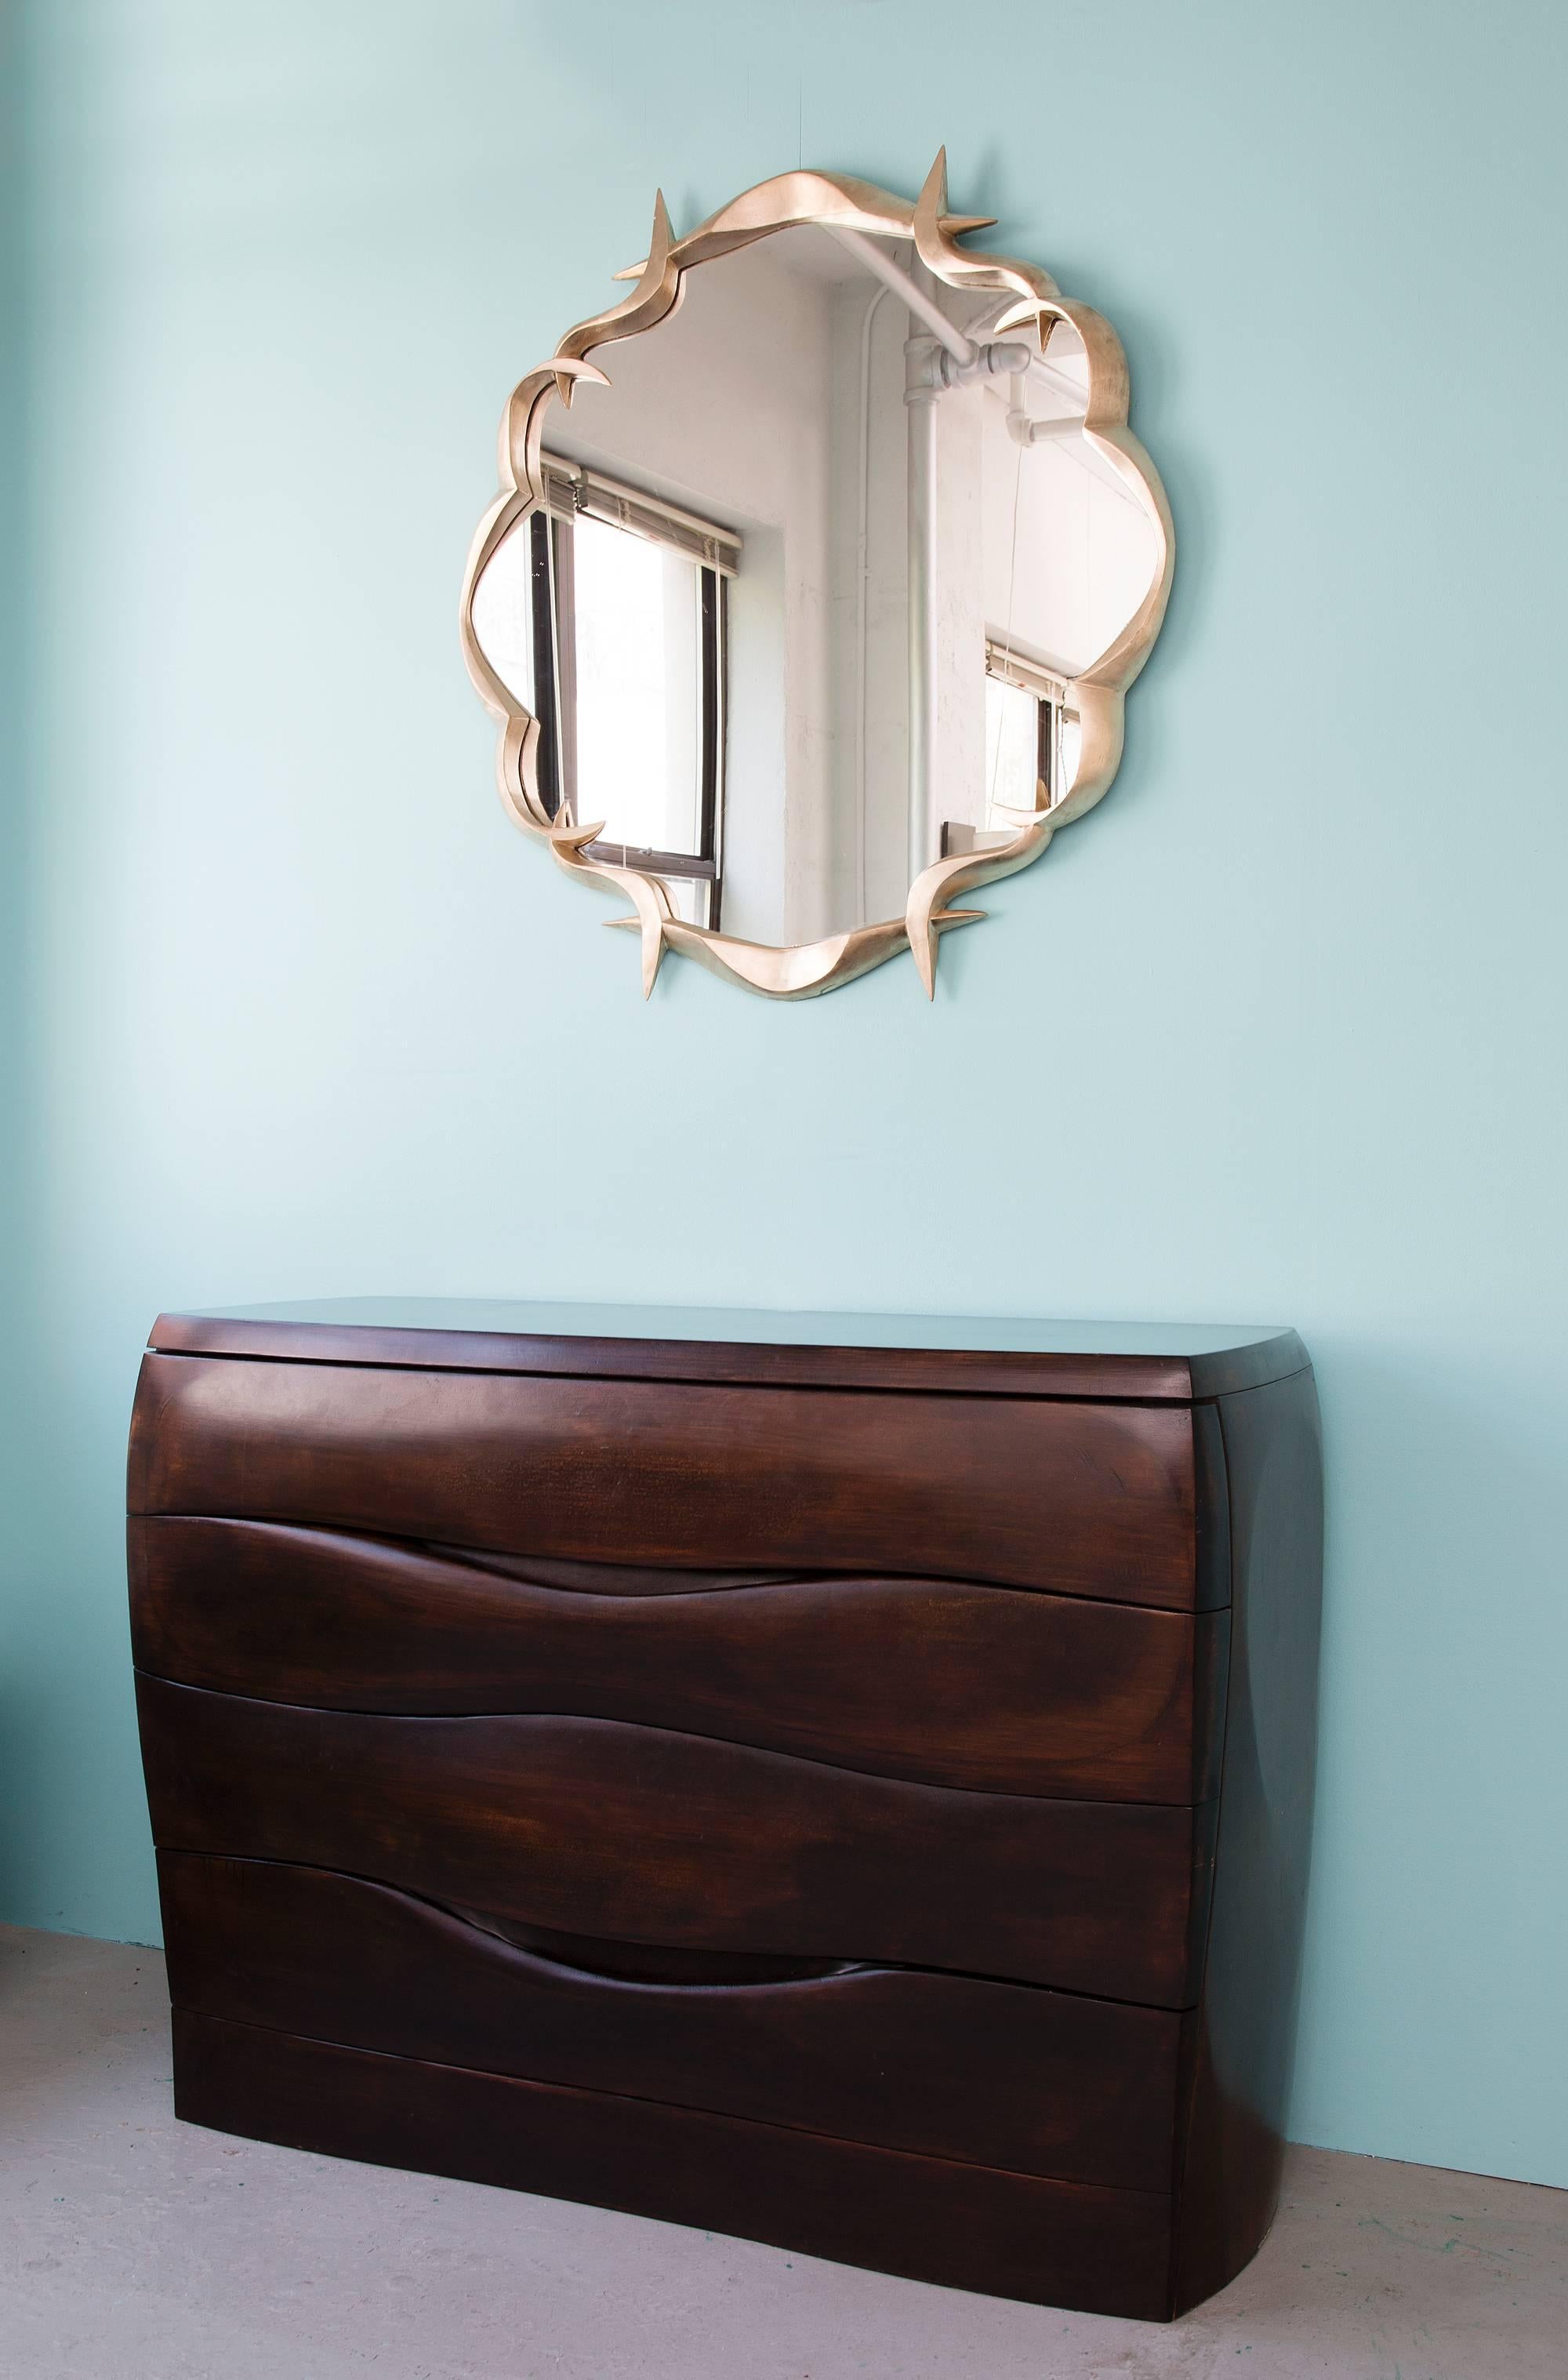 This elegant, finely crafted mirror is made in bronze and gold leafed. 

Anasthasia Millot has learned to translate into bronze the fluidity of preferred textiles like jersey, creating subtly dynamic shapes that seem to defy the statics of solid